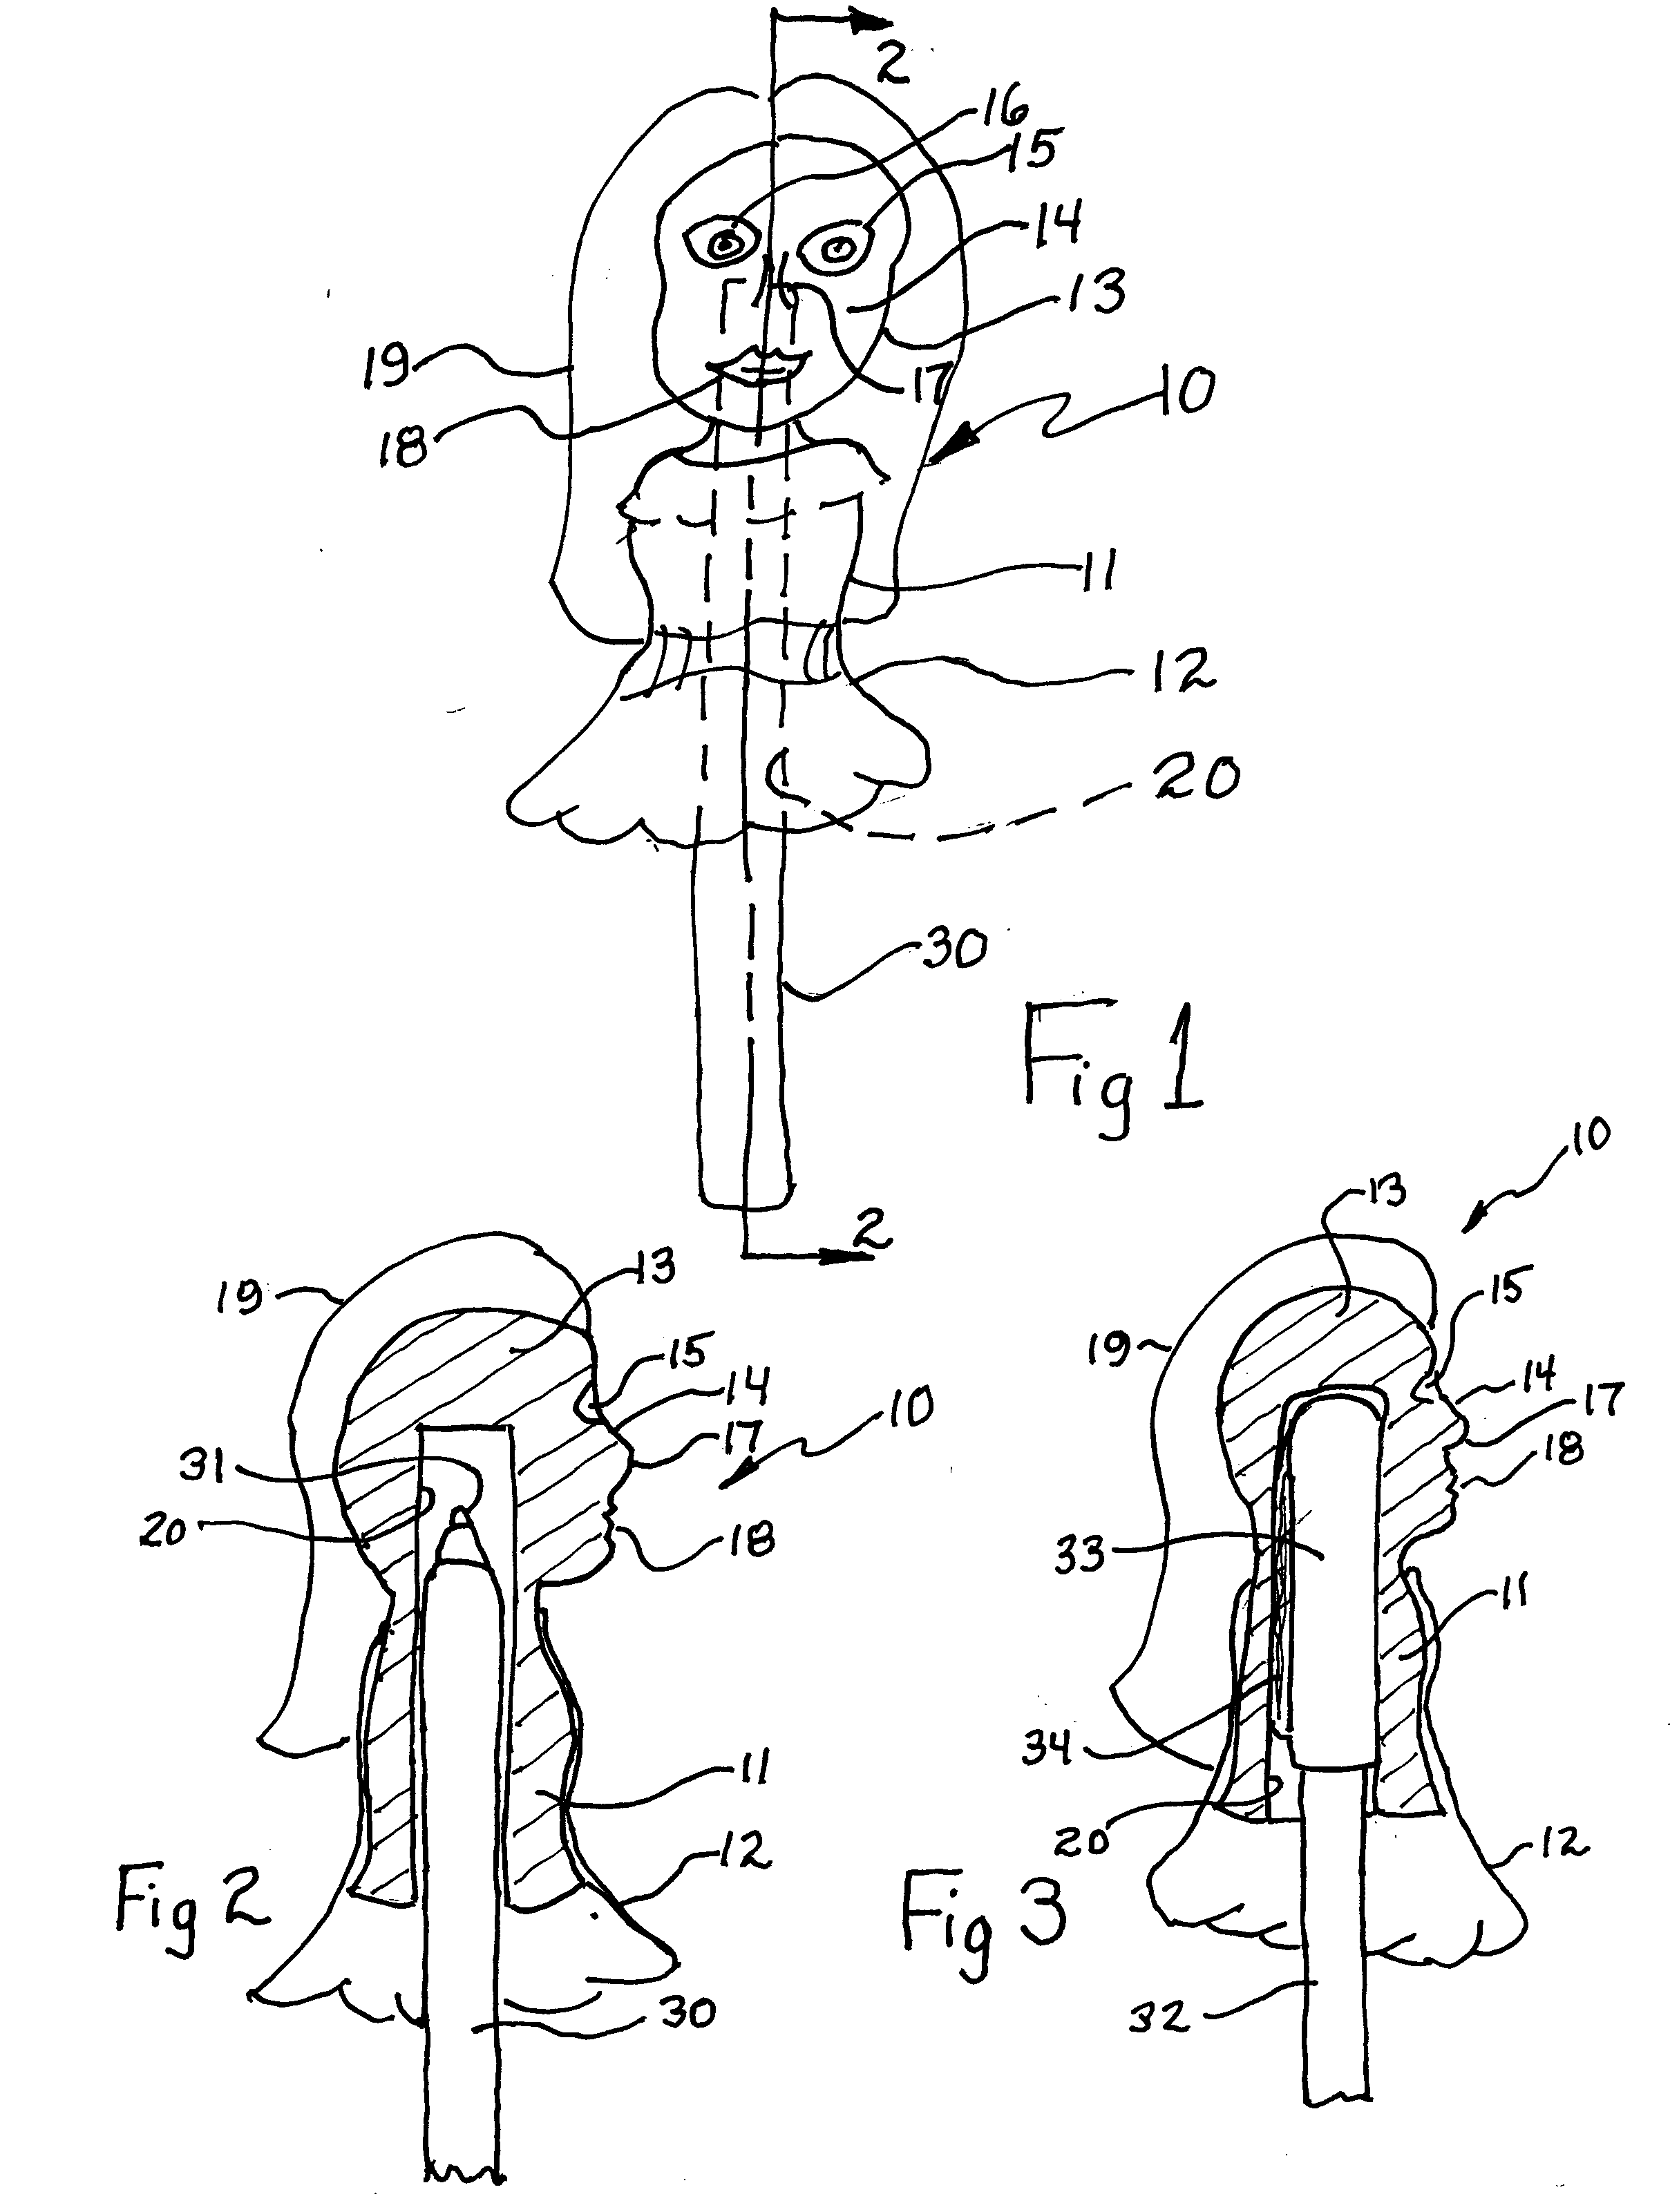 Doll Supported by a Pen, Pencil or Other Implement and Accessories Therefor